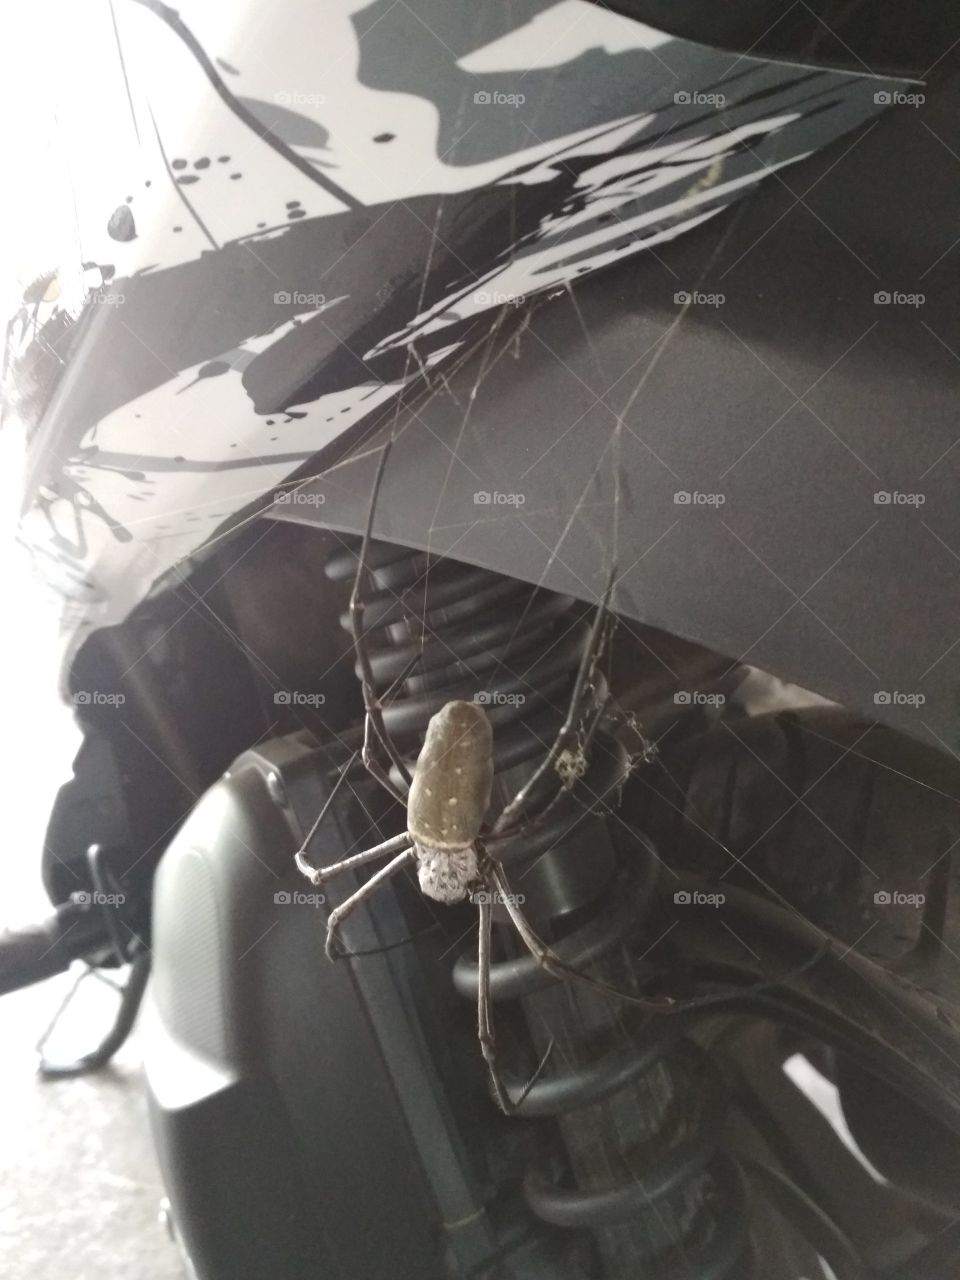 The spider on the bike